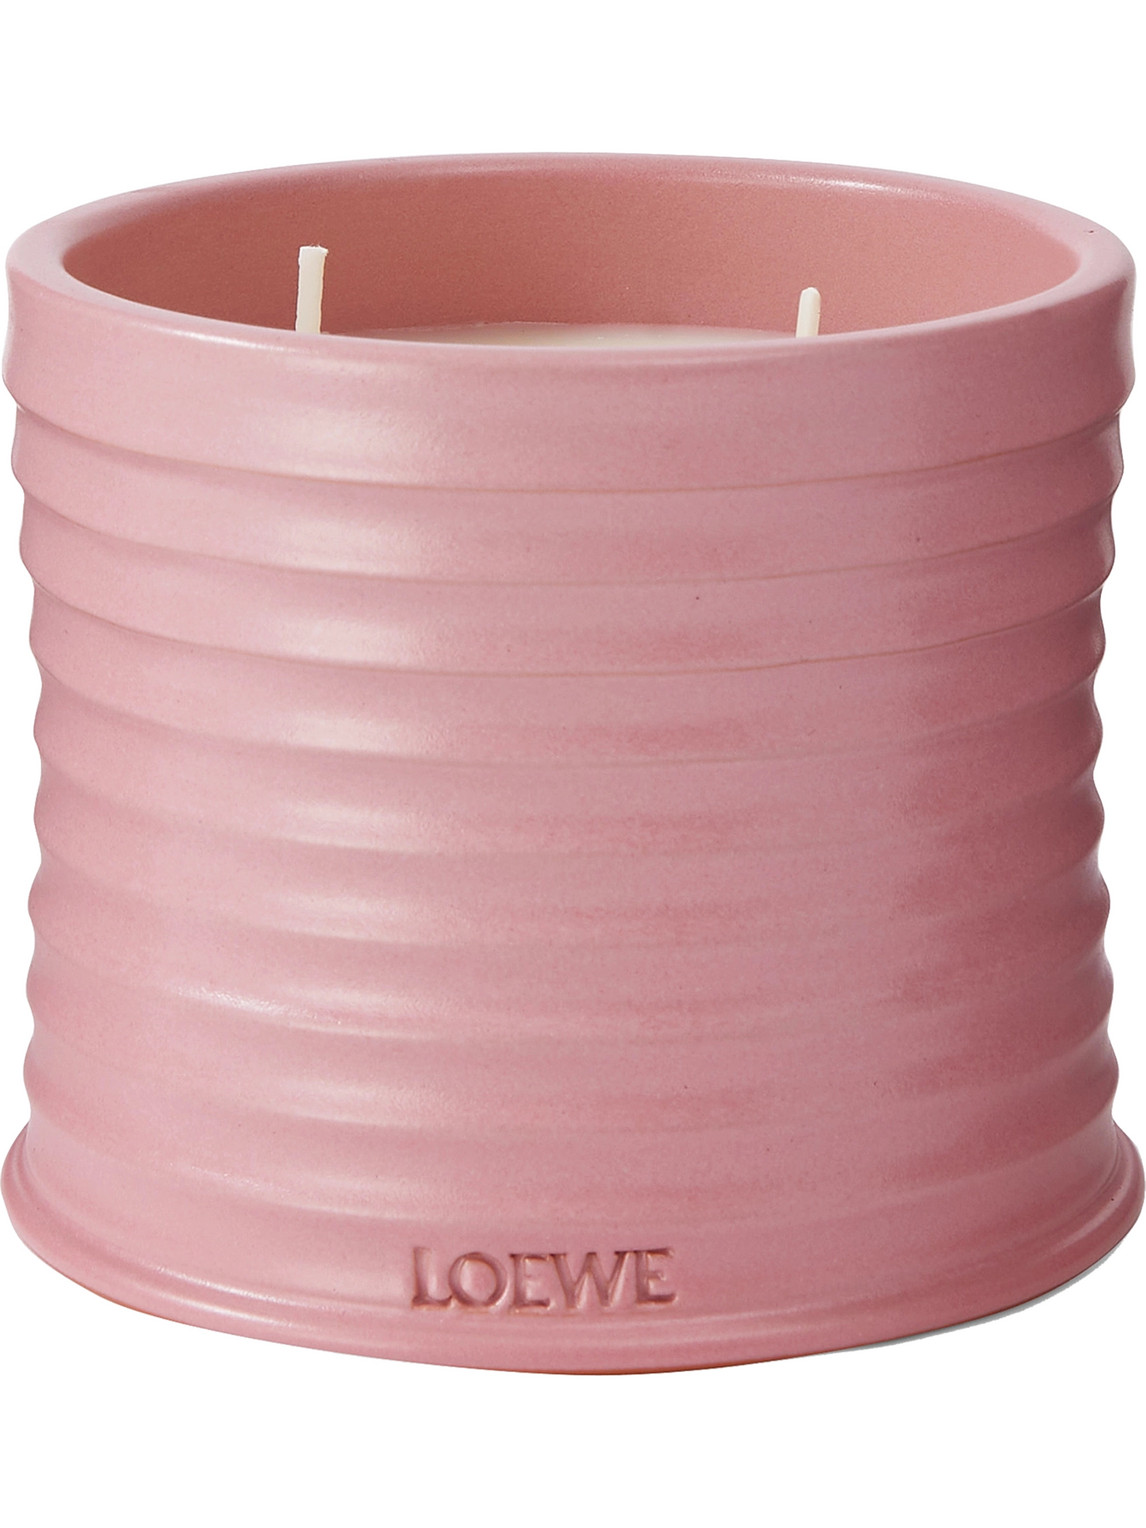 Loewe Ivy Medium Scented Candle, 610g In Colorless